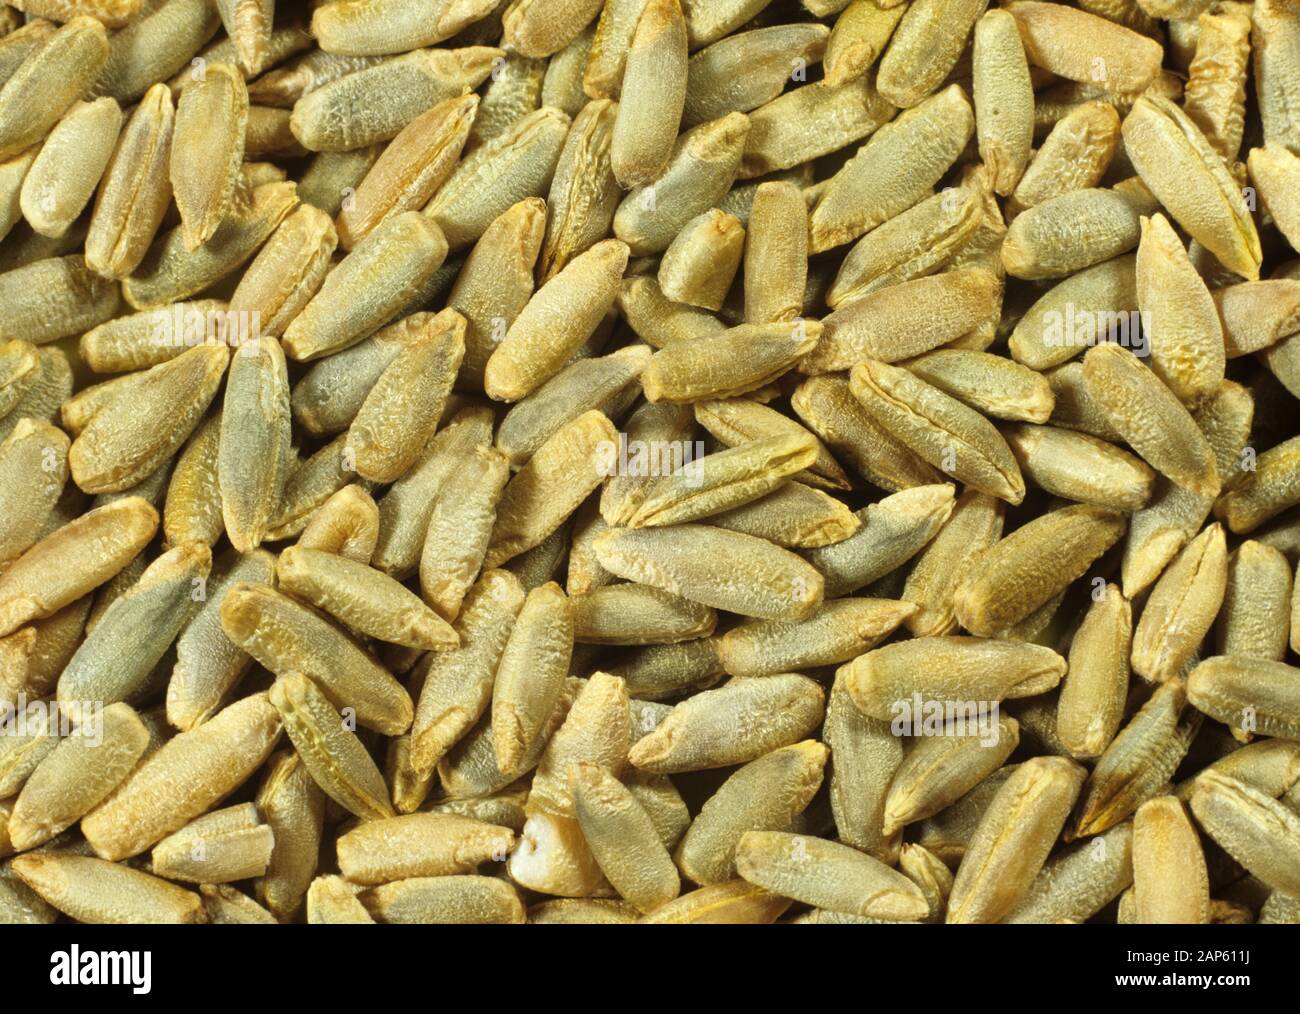 Rye (Secale cereale) grain or seed, variety Animo Stock Photo